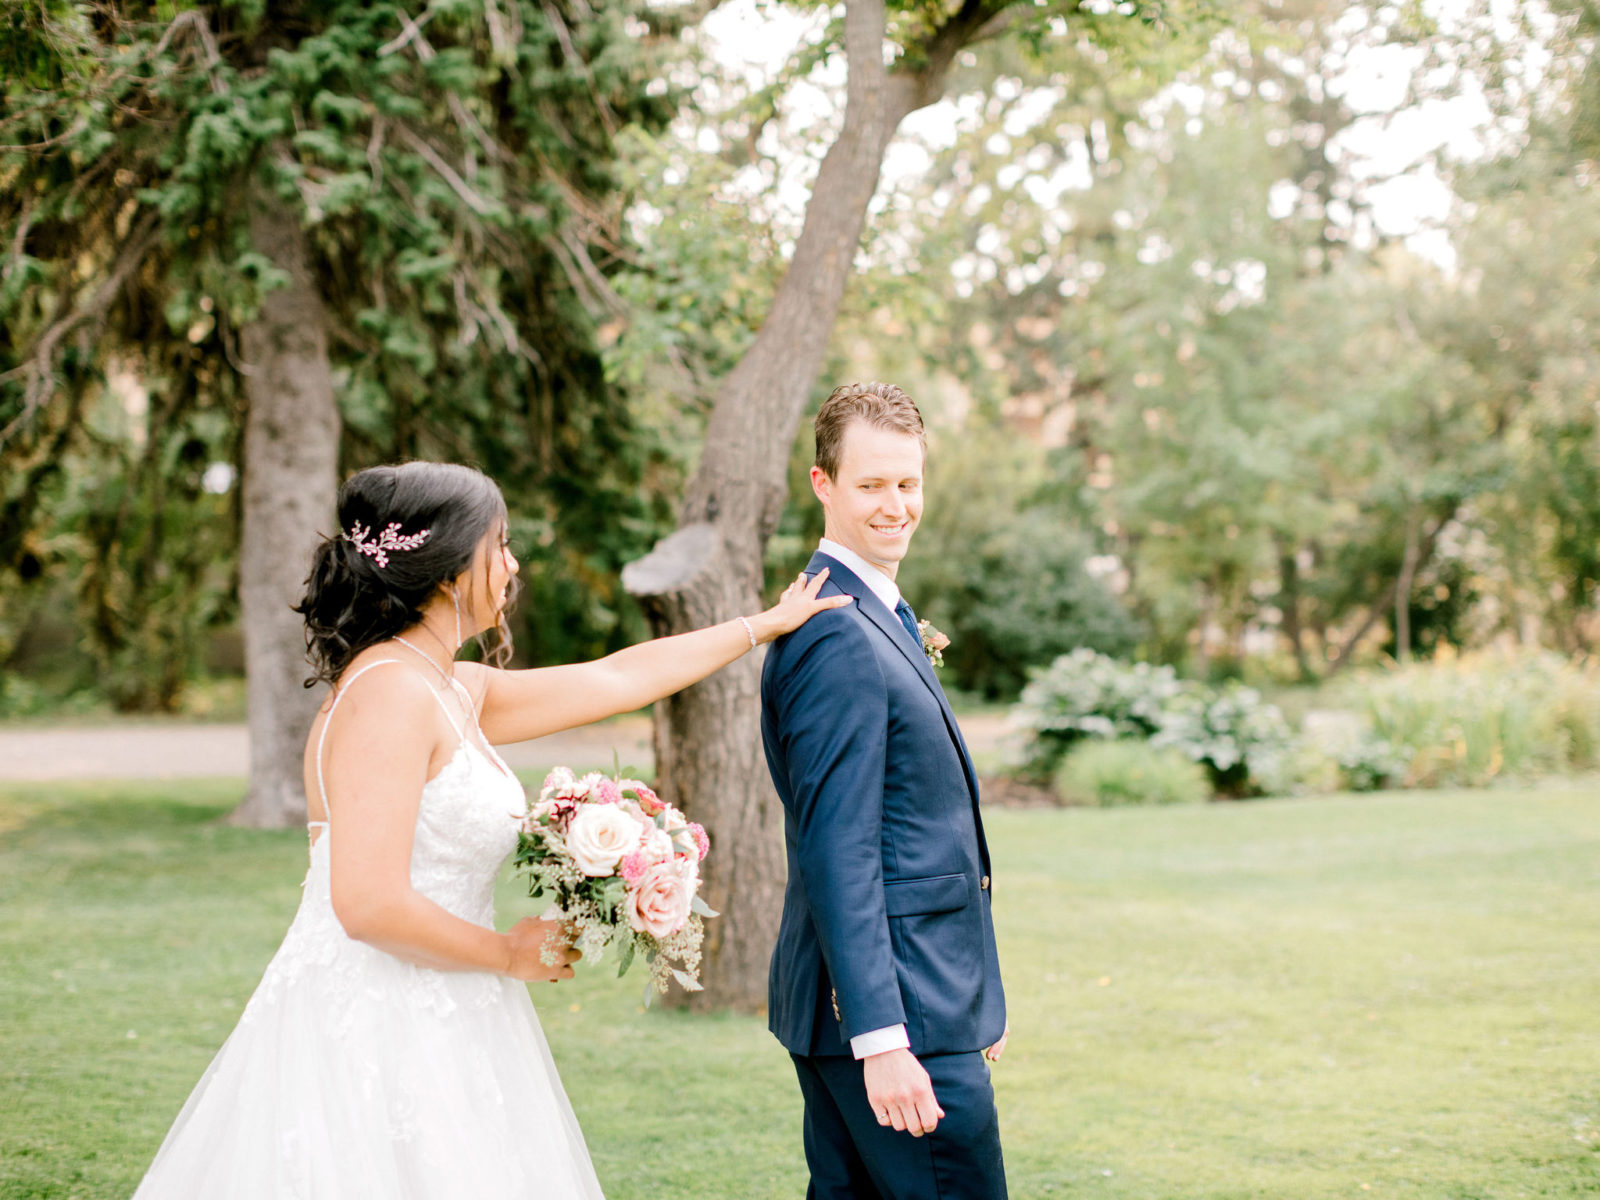 Sweet and stunning first look in Calgary Park for this summer wedding full of lavish details